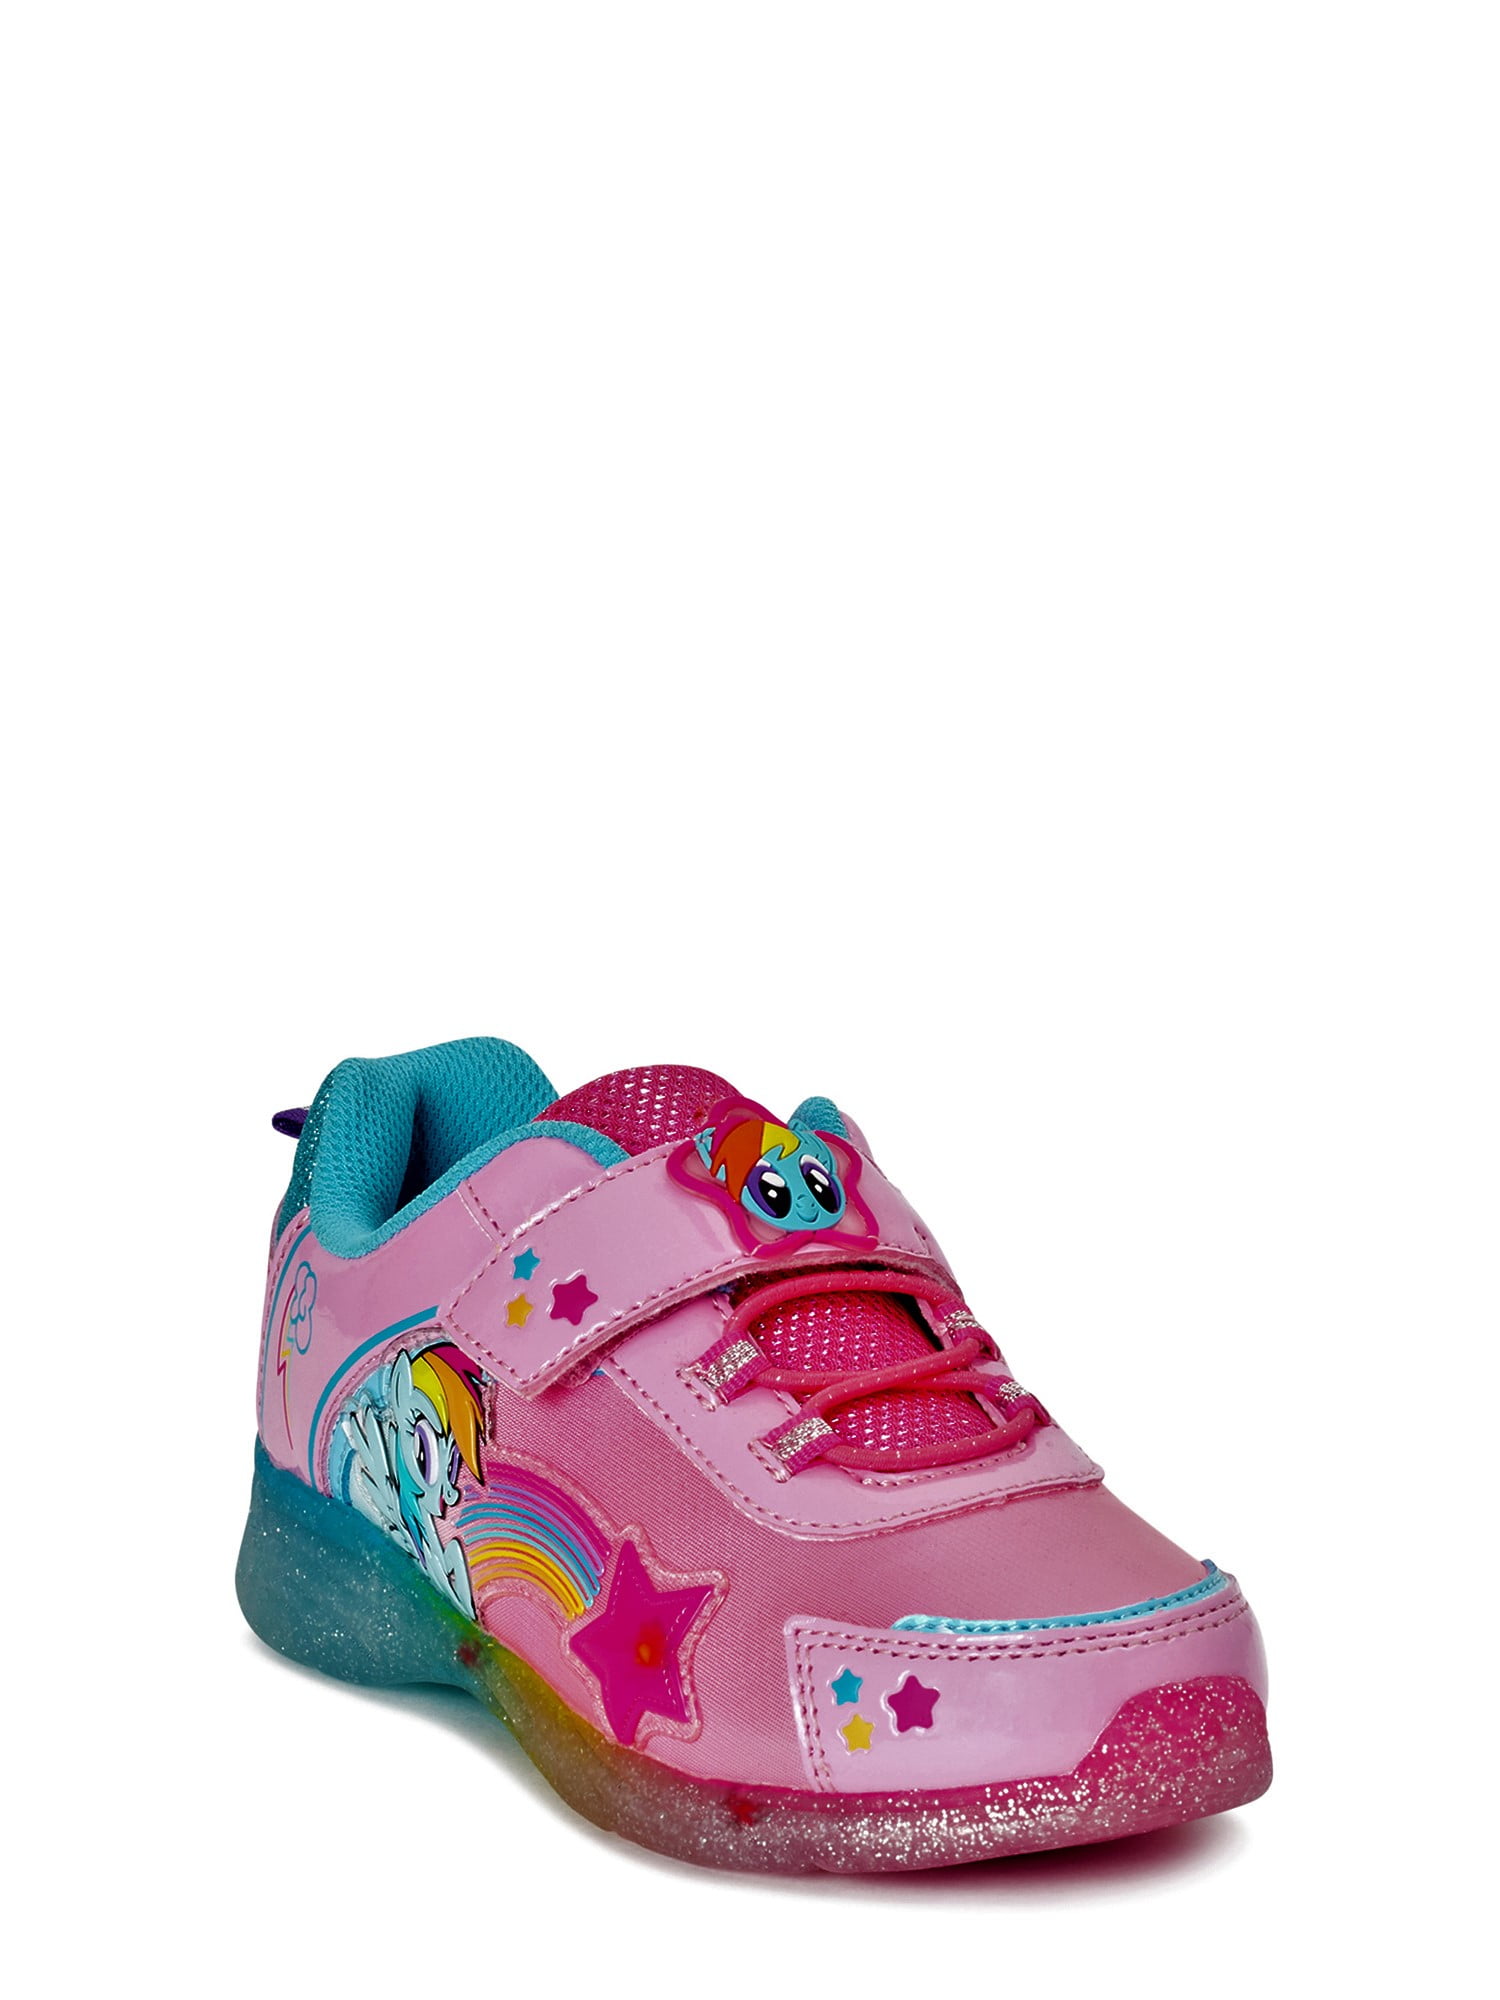 My Little Pony Shoes : Apparel 